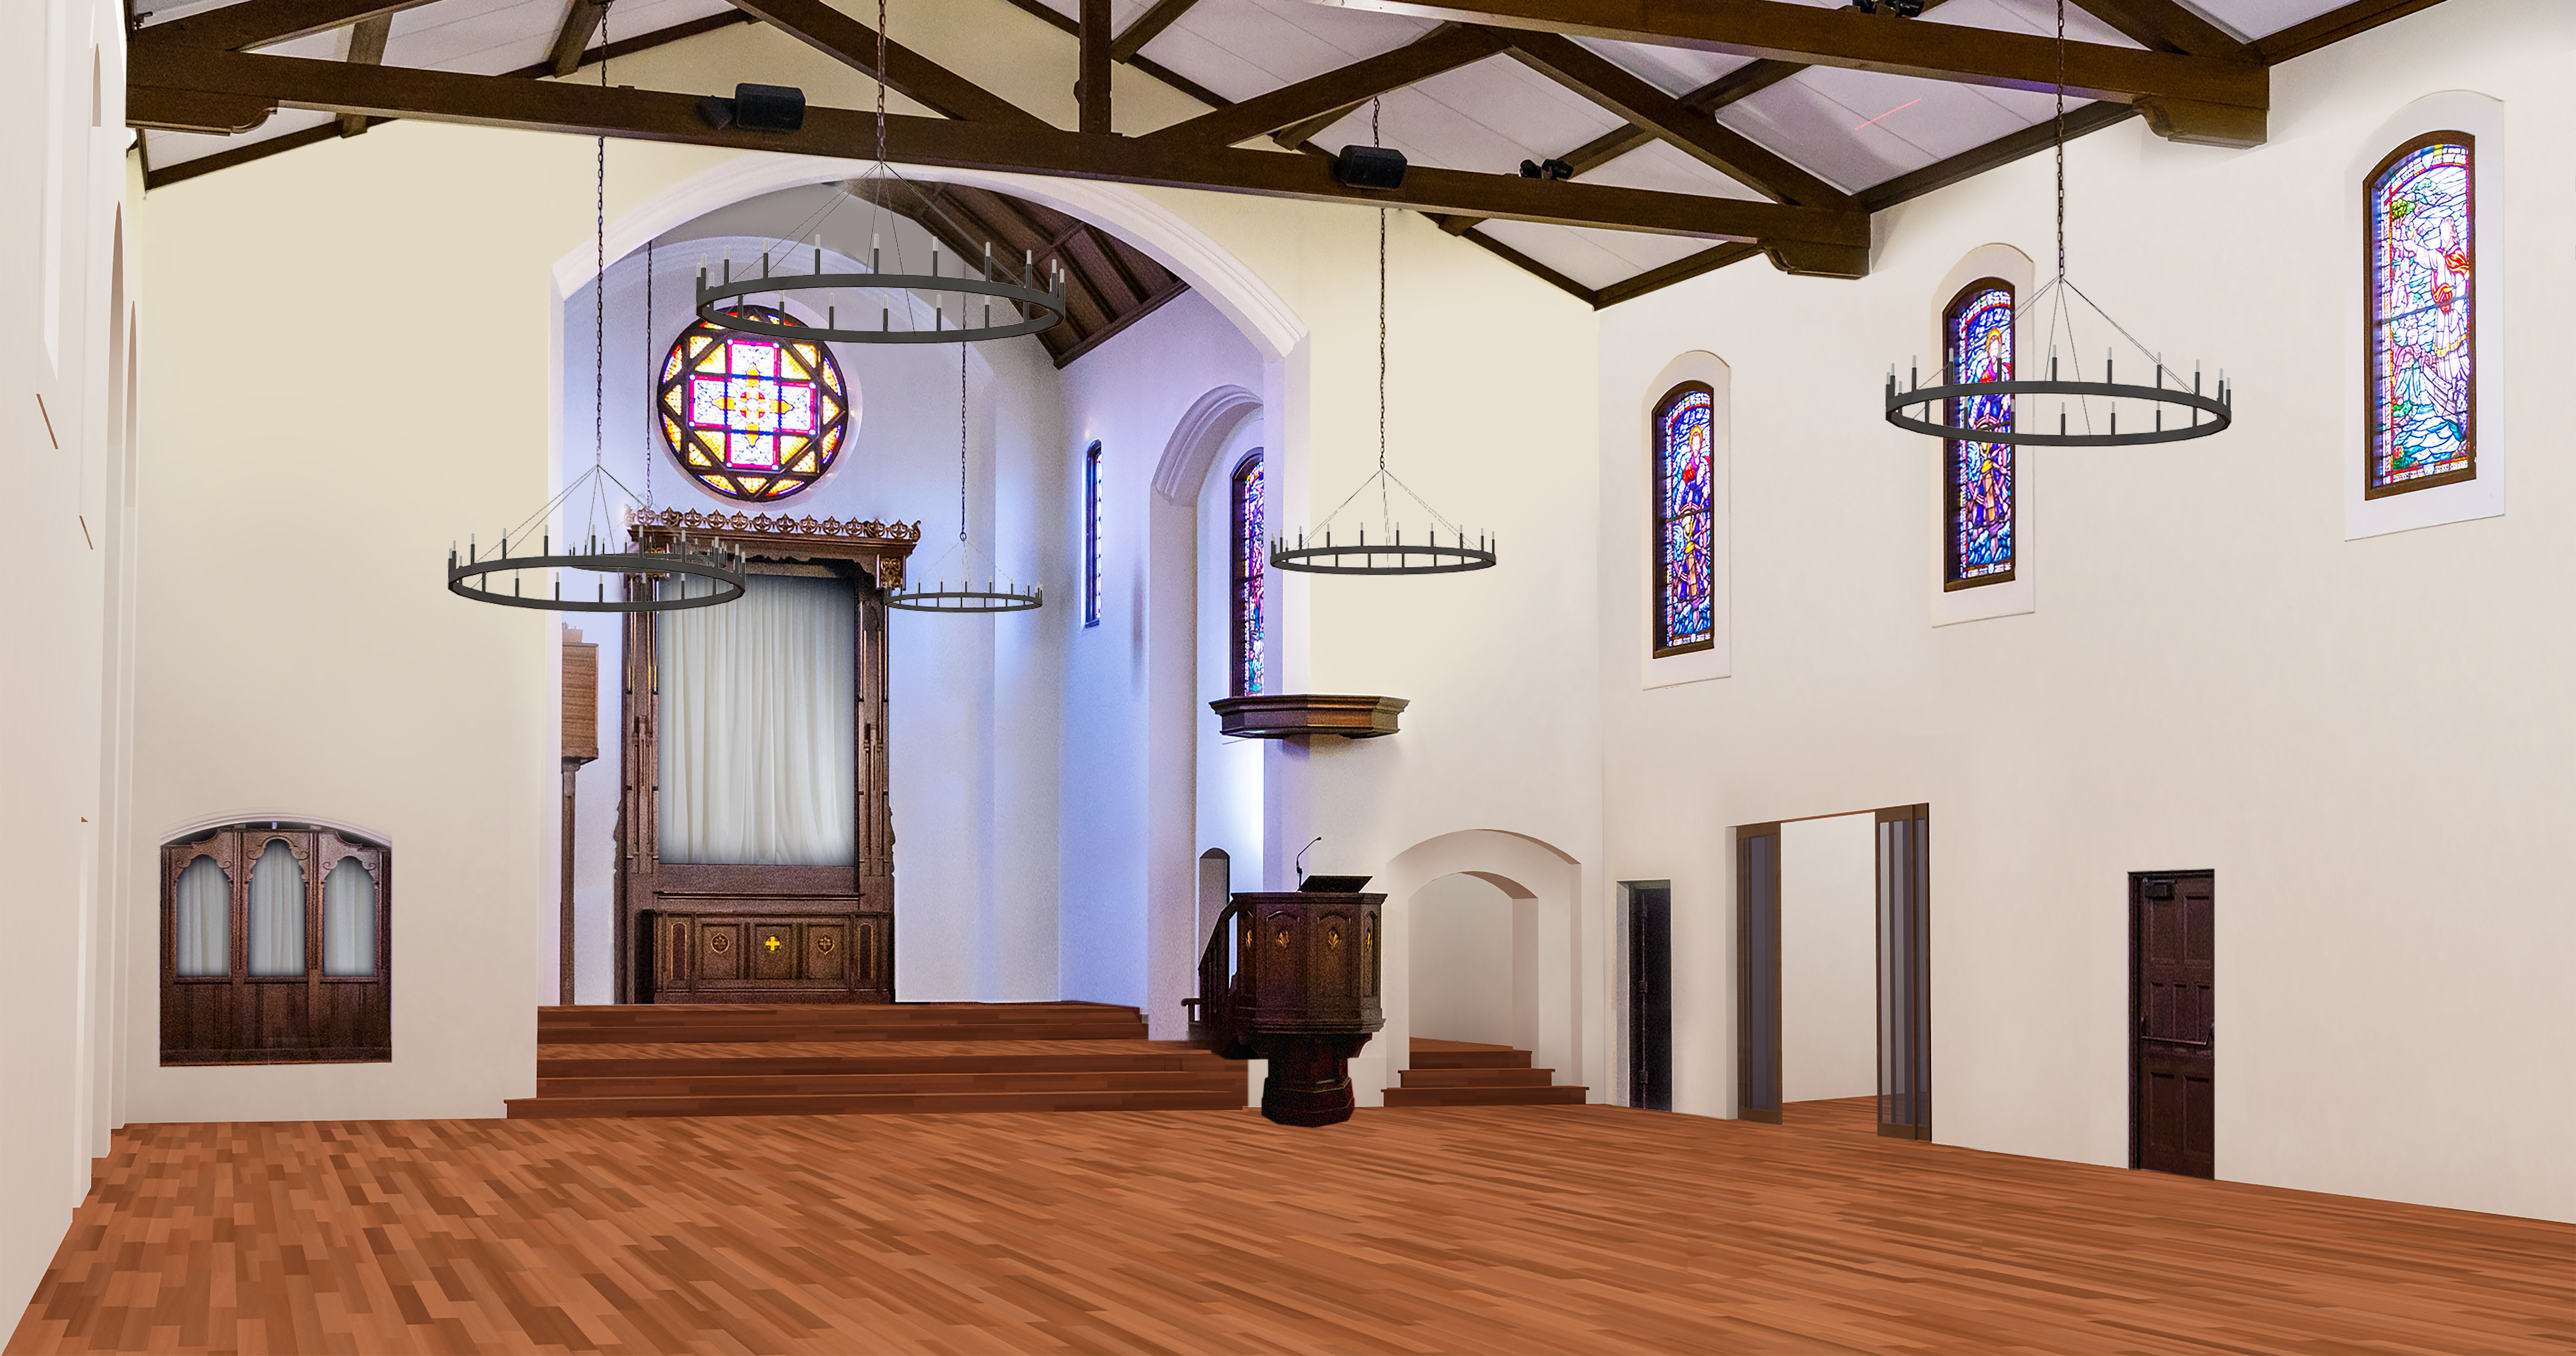 Rendering of the interior of the North Chapel at Liberty Station. (Courtesy of 828 Venue Management Company)